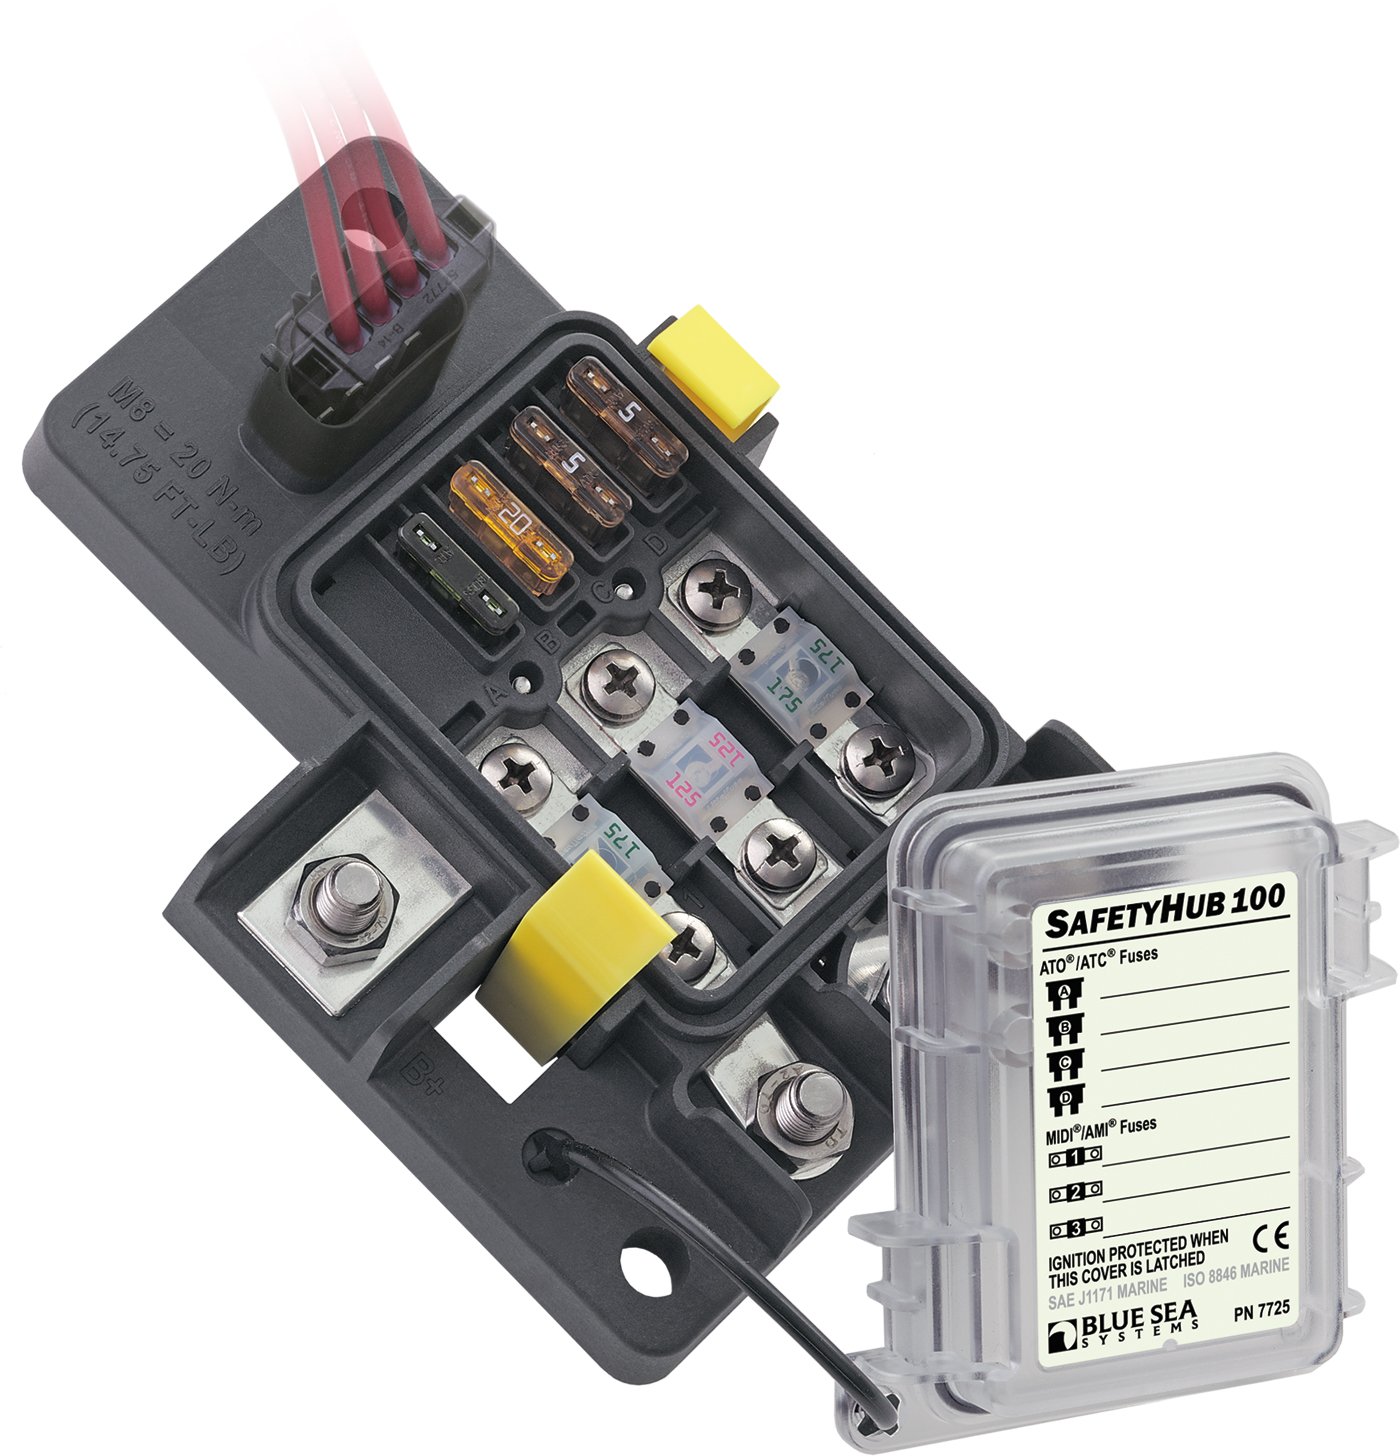 Blue Sea 7725 Fuse Block Safety Hub 100 Questions & Answers